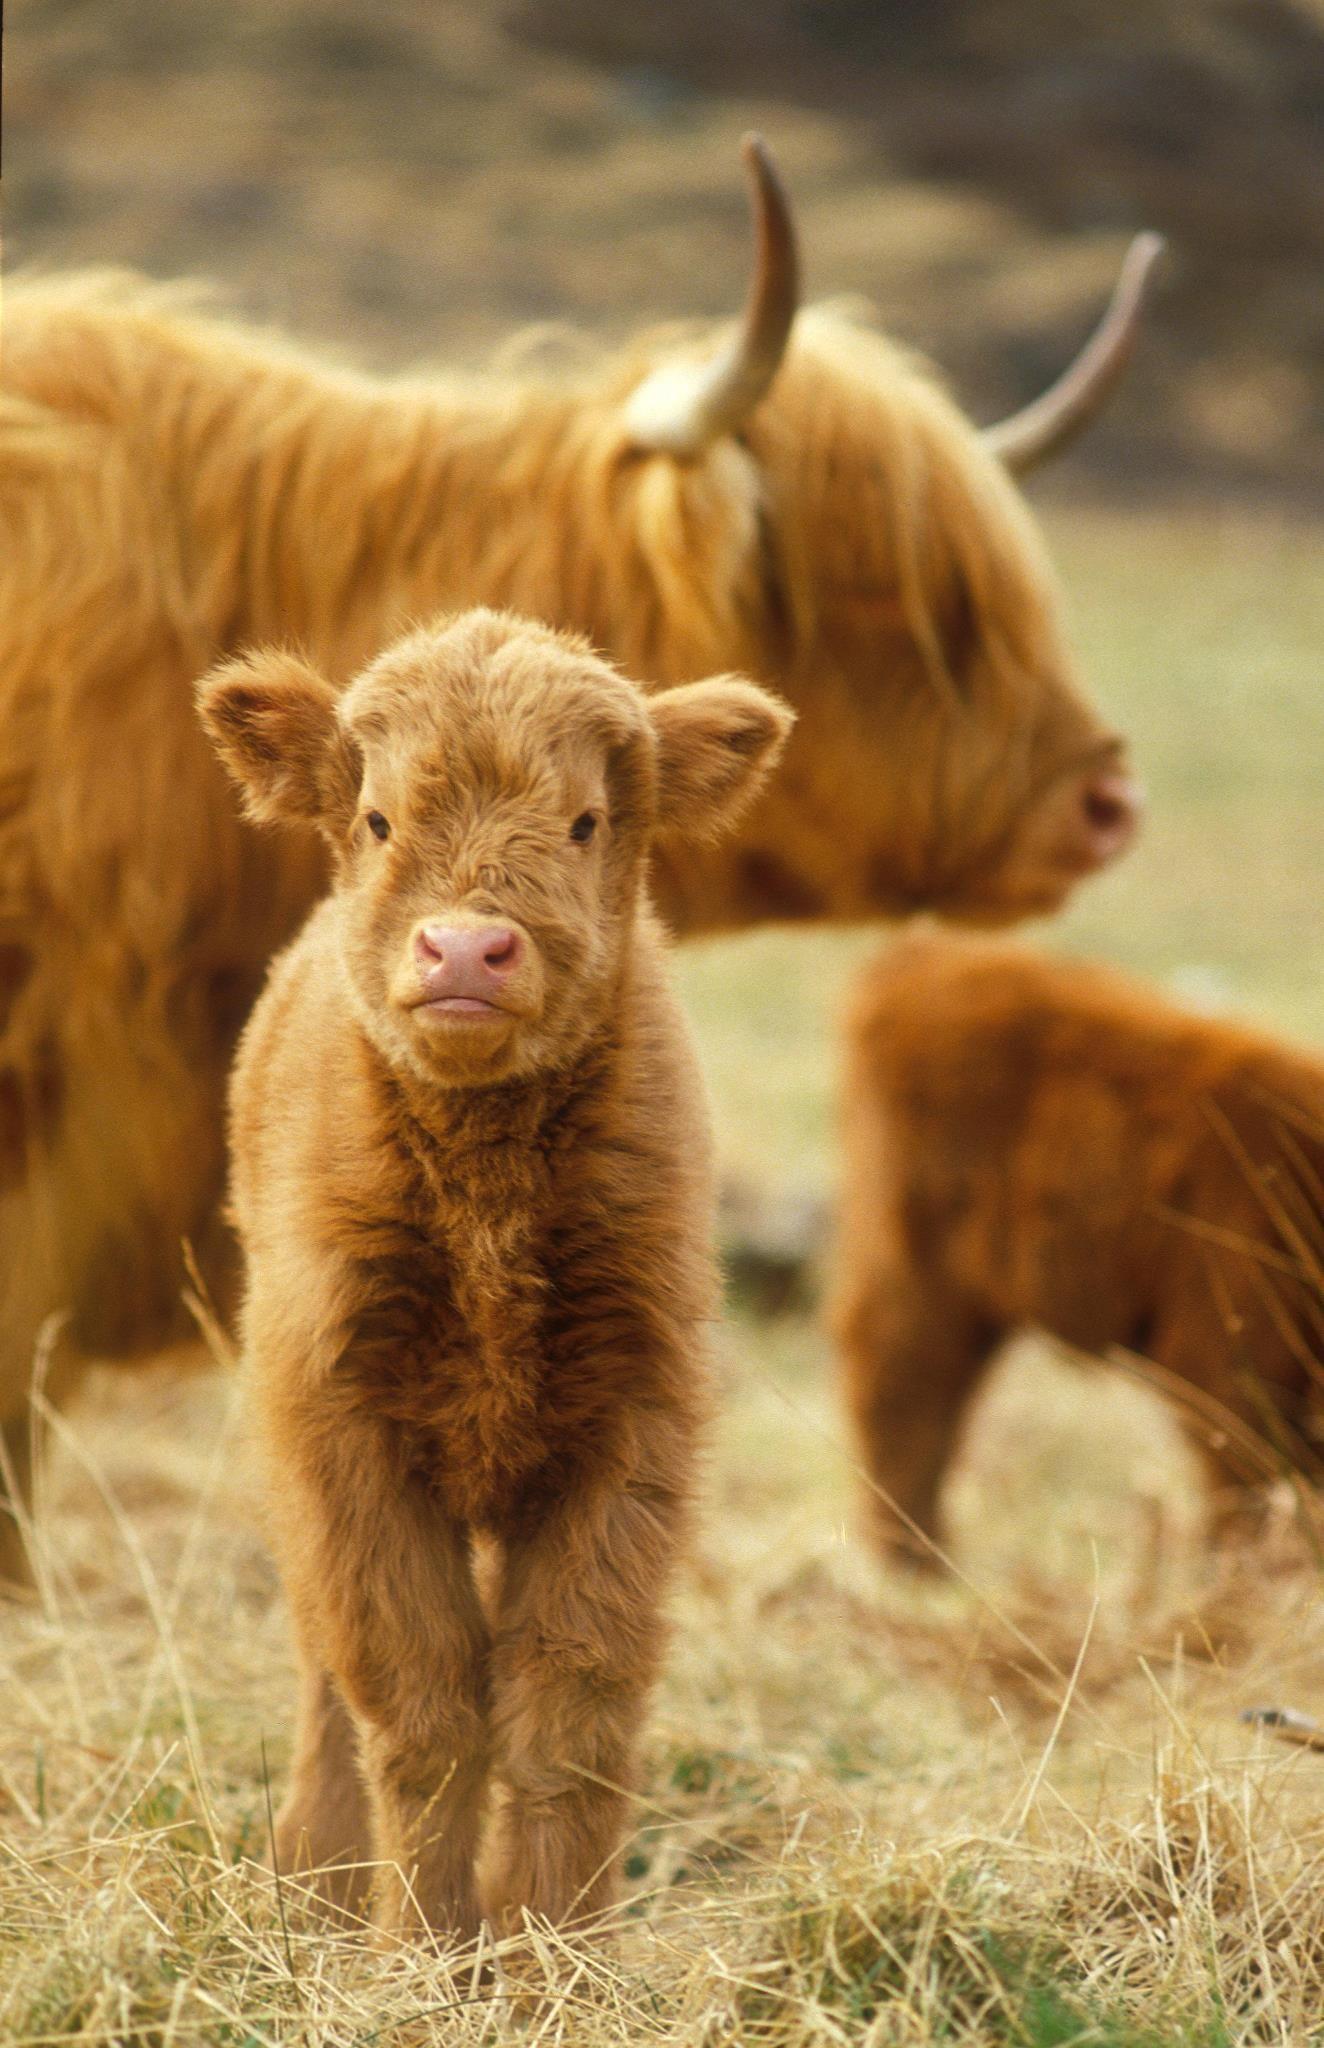 wee highland baby. Baby animals, Animals, Cute cows